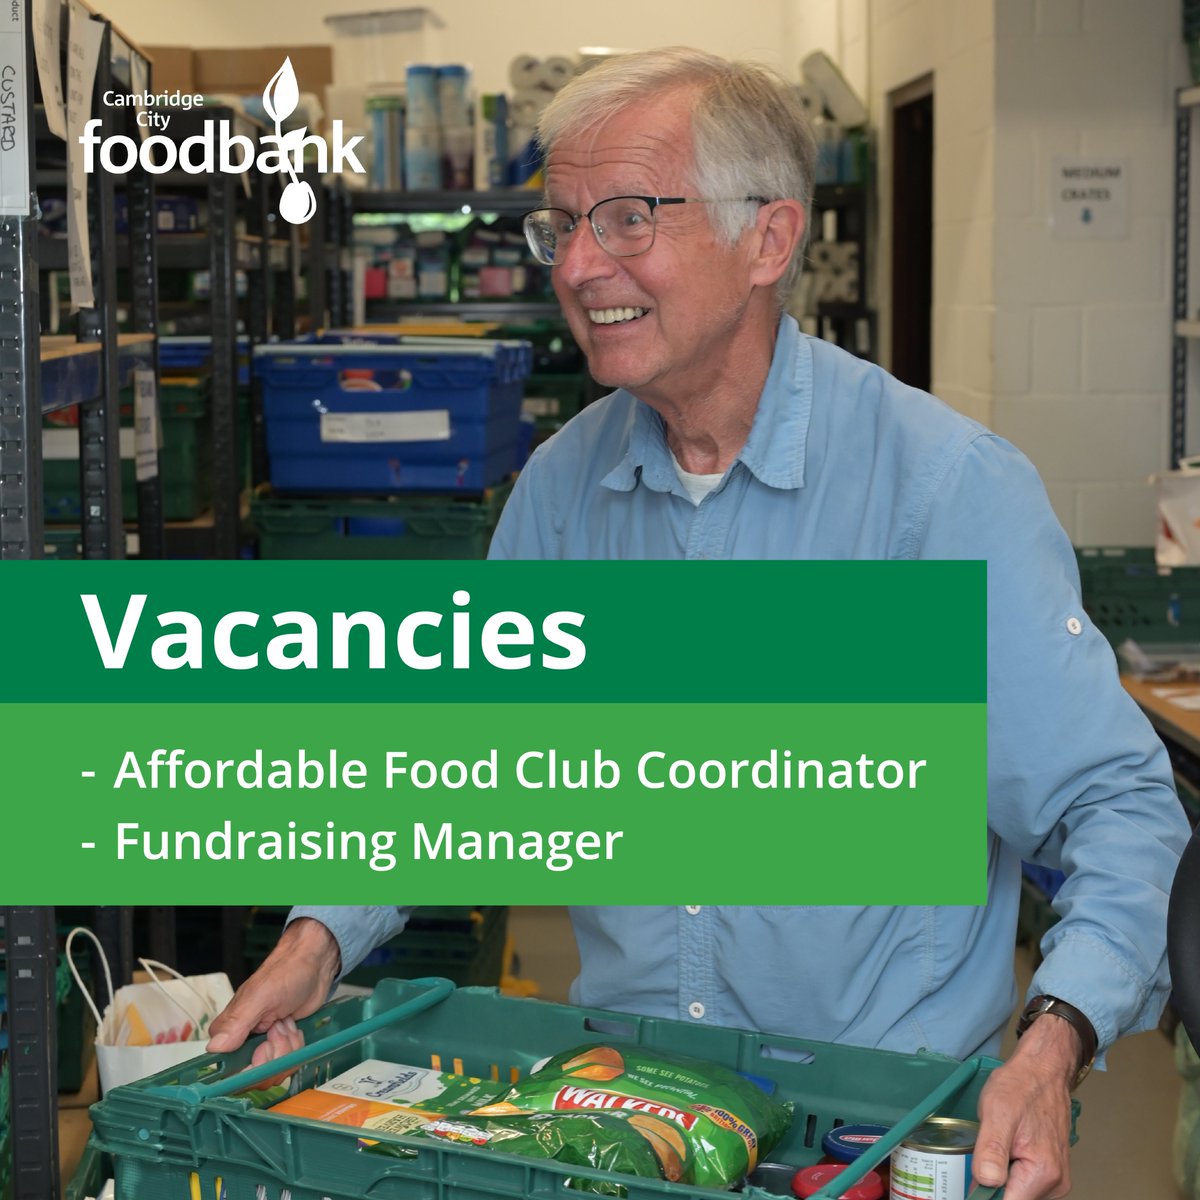 Are you passionate about helping others? Do you want to end #FoodInsecurity in #Cambridge? We’re currently recruiting for an Affordable Food Club Coordinator to run a Food Hub in Trumpington, and a #Fundraising Manager to join our team. Apply here: cambridgecity.foodbank.org.uk/news/